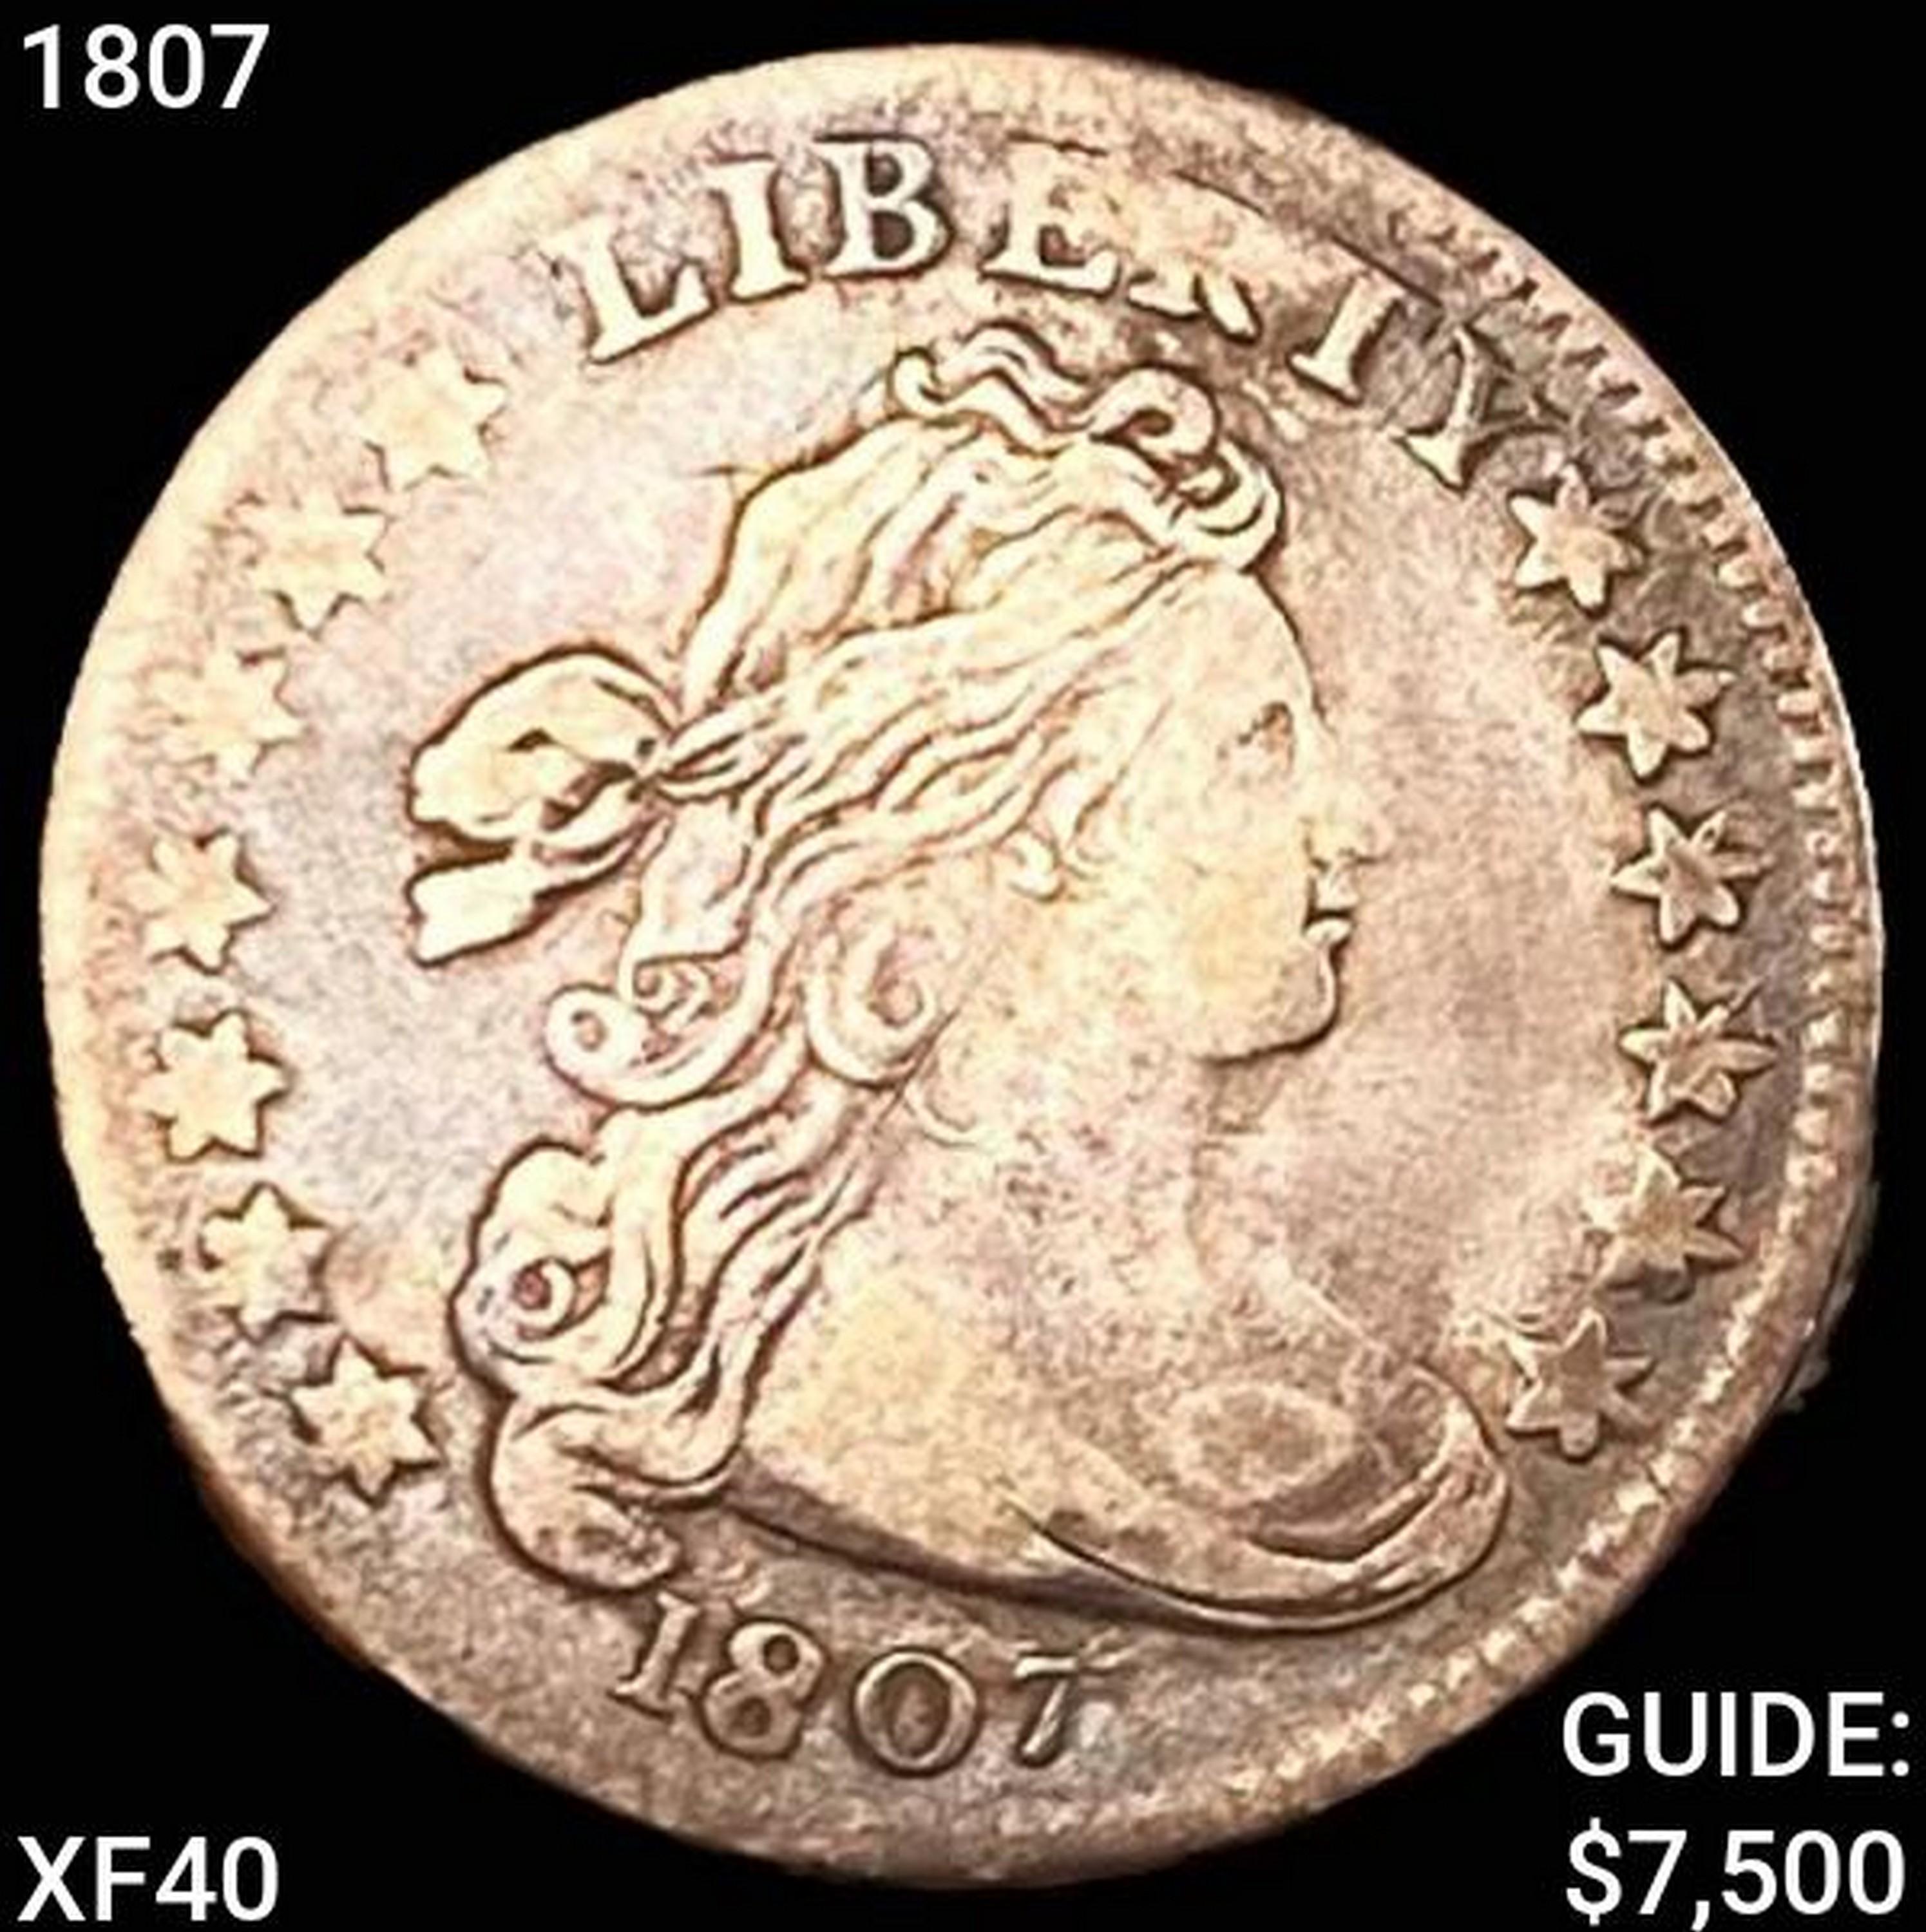 1807 Draped Bust Dime NEARLY UNCIRCULATED